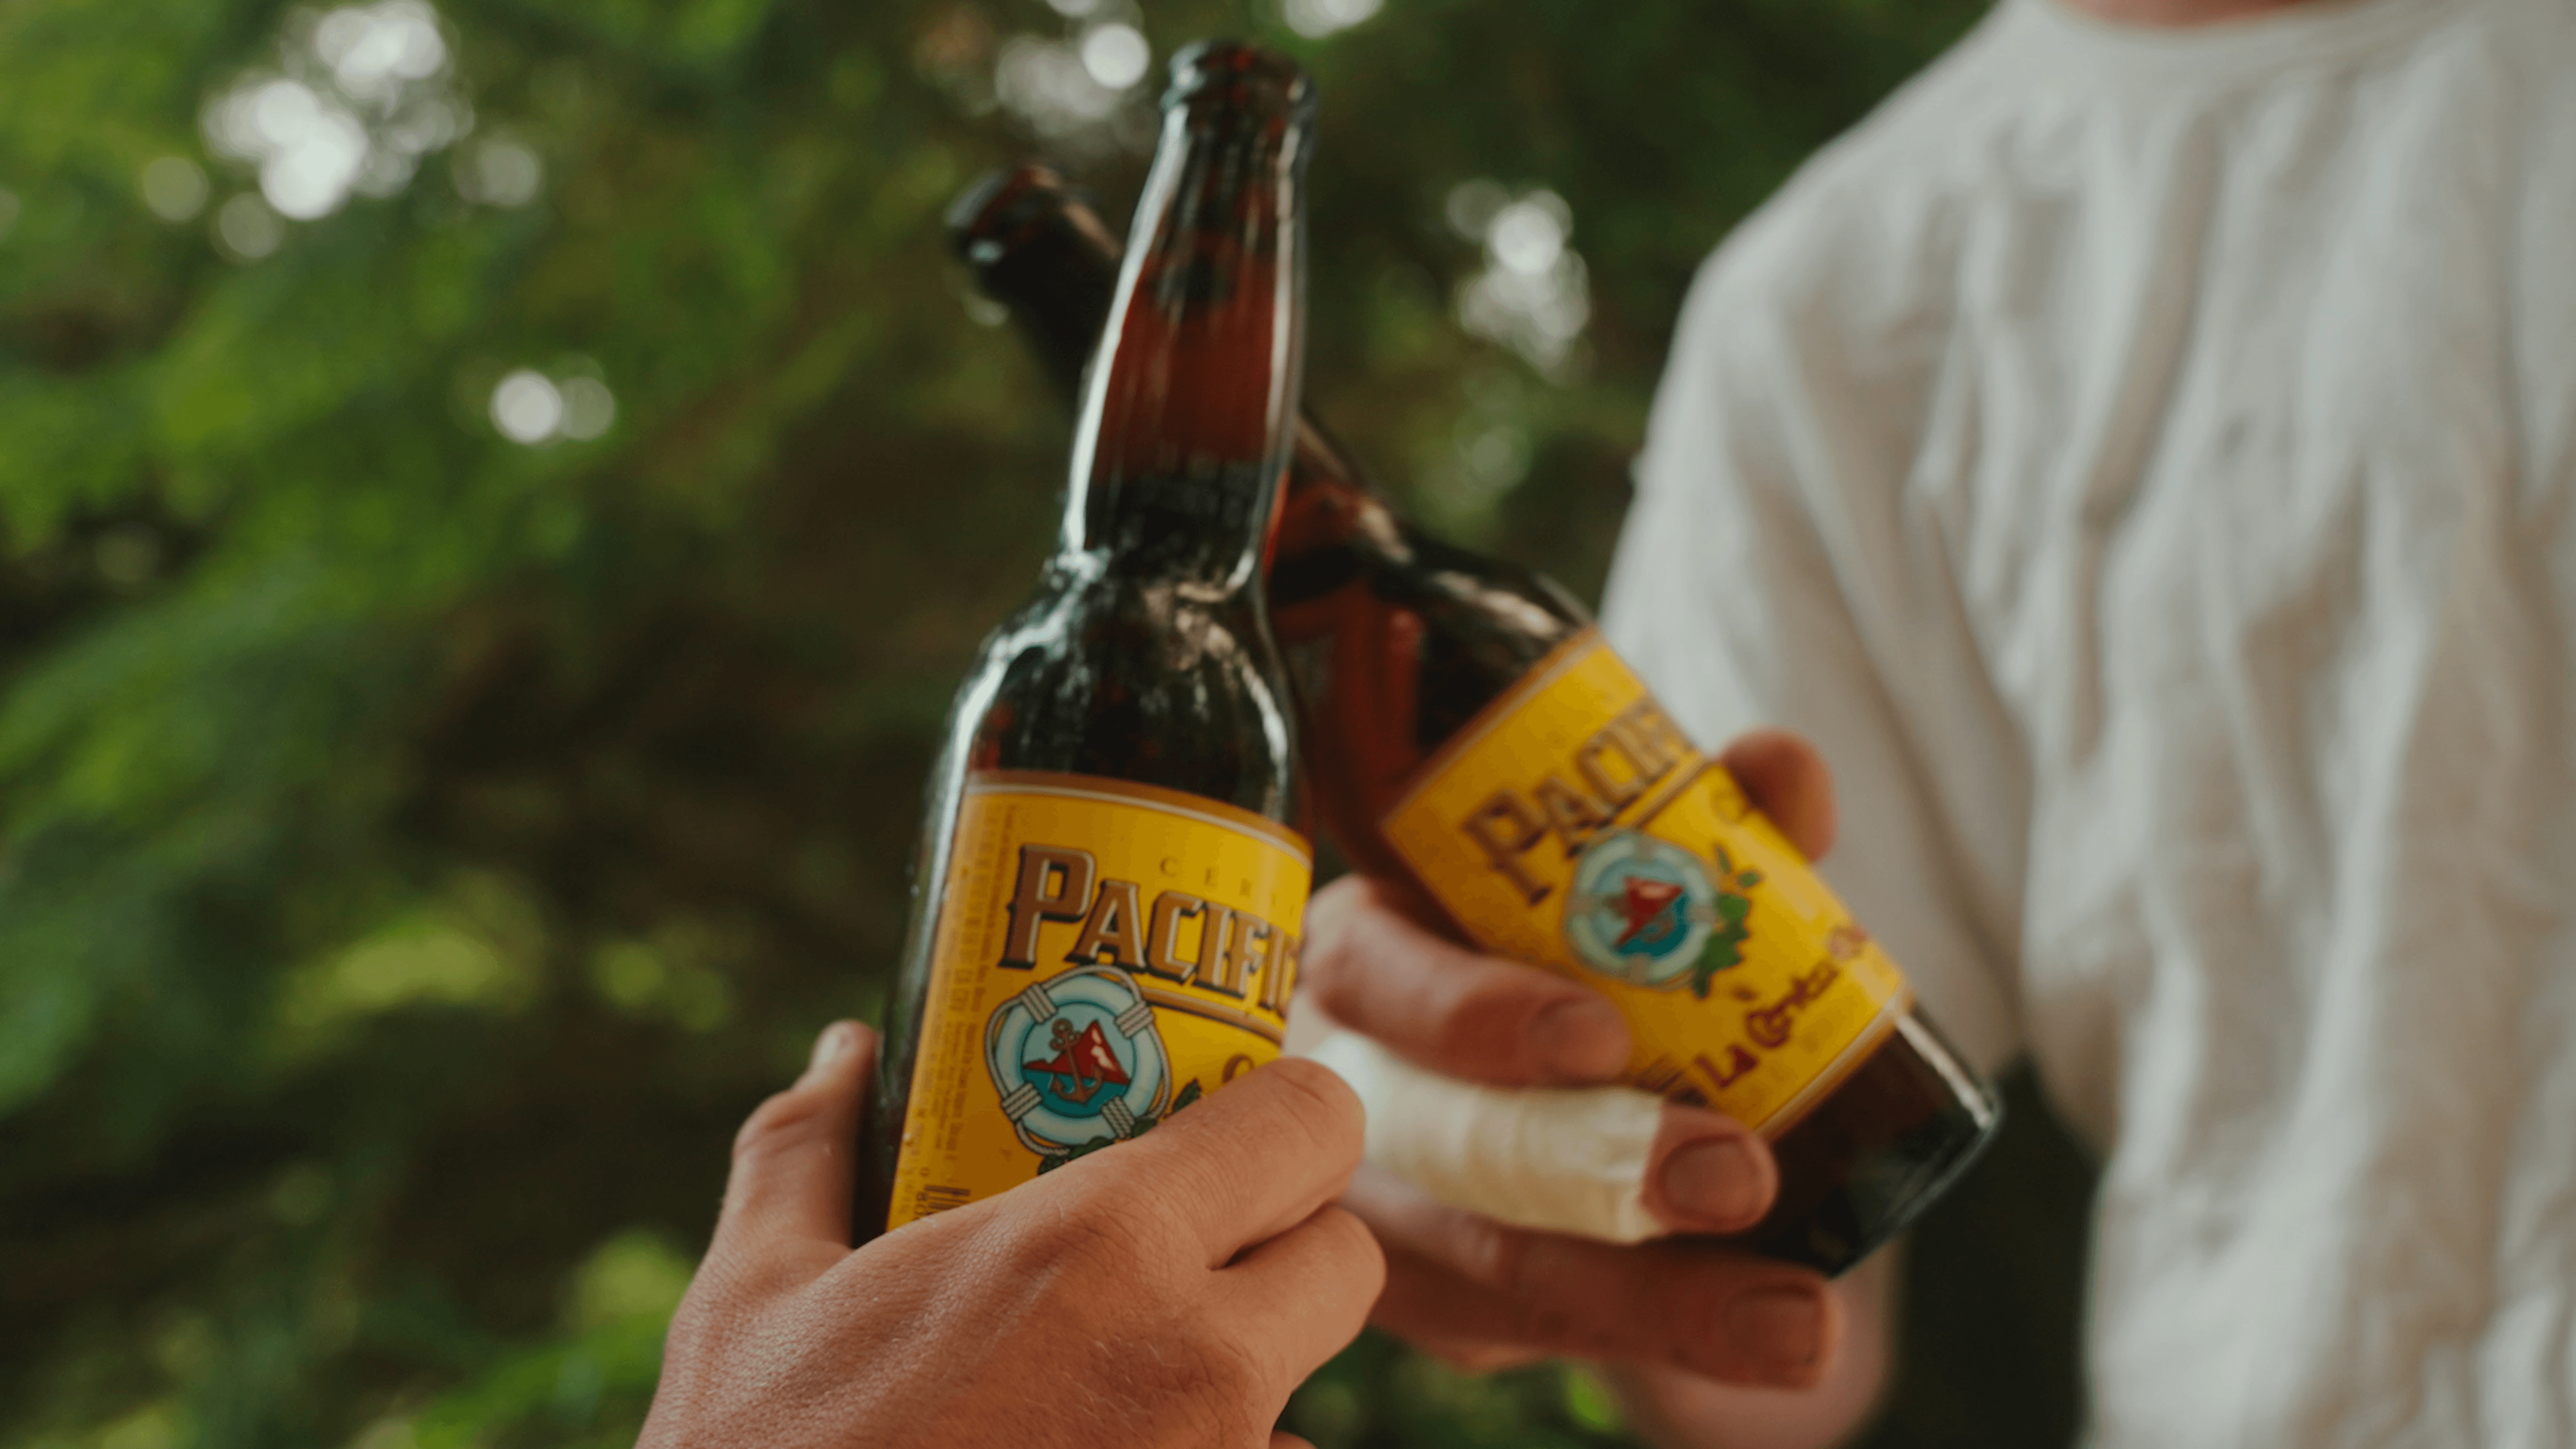 Pacifico Beer x Creature Skateboards